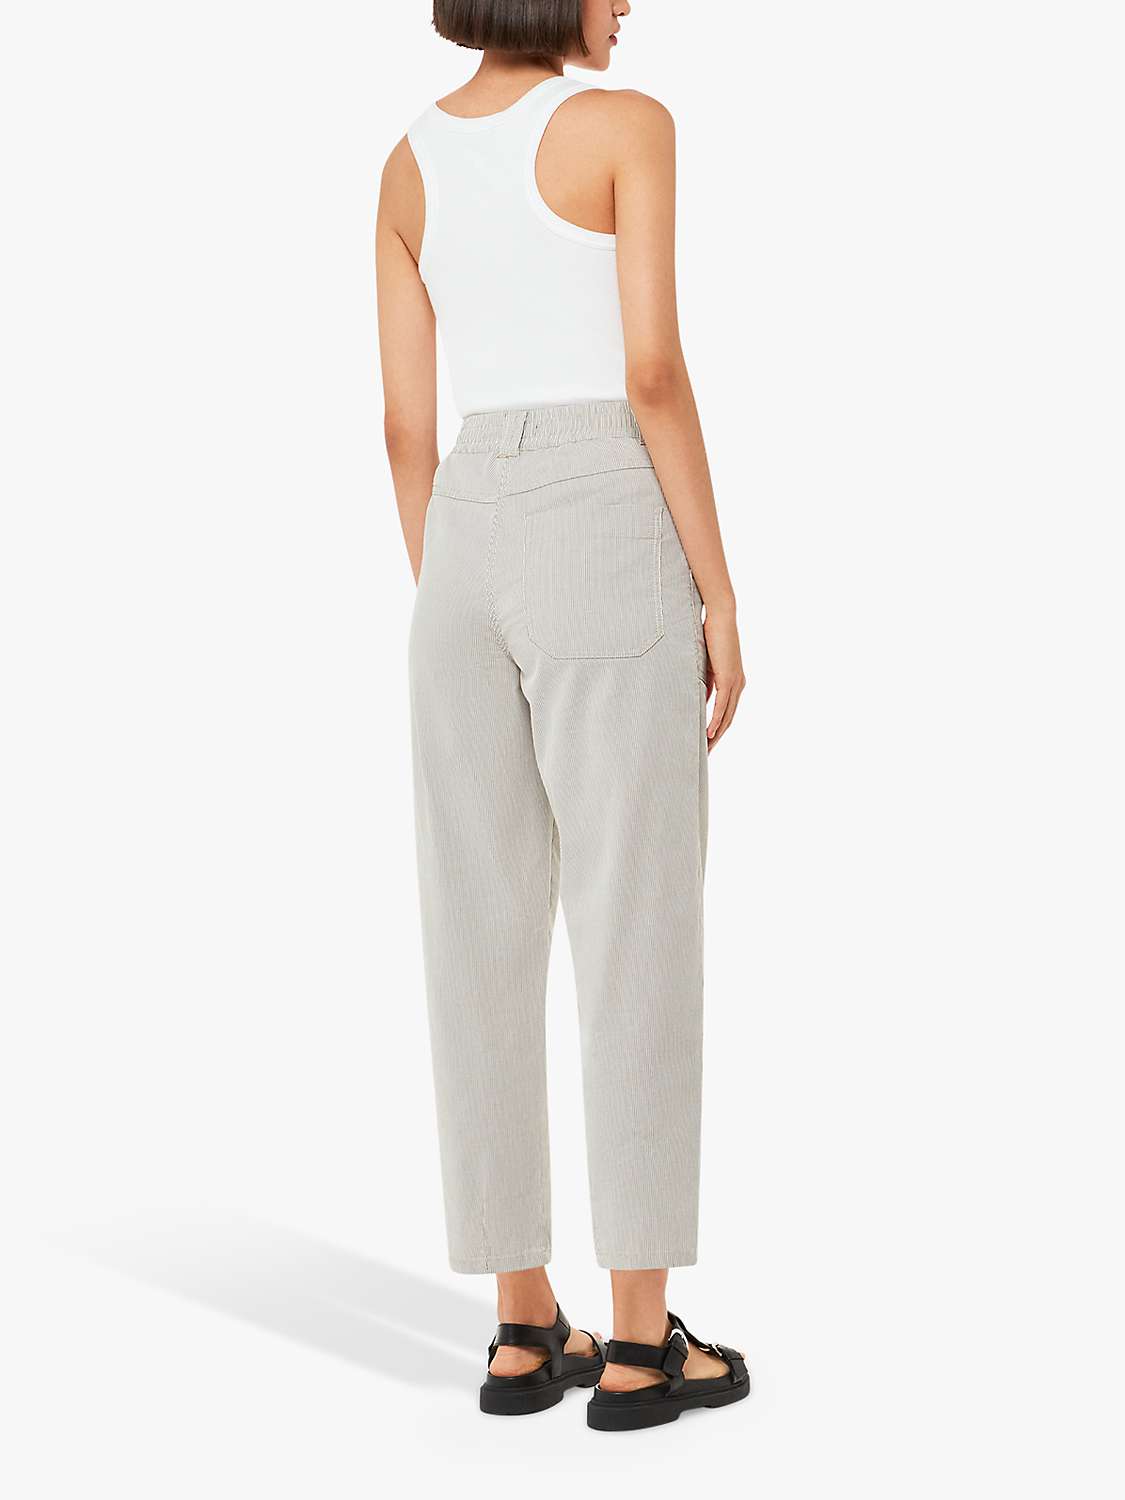 Buy Whistles Tessa Stripe Casual Trousers, Grey Online at johnlewis.com